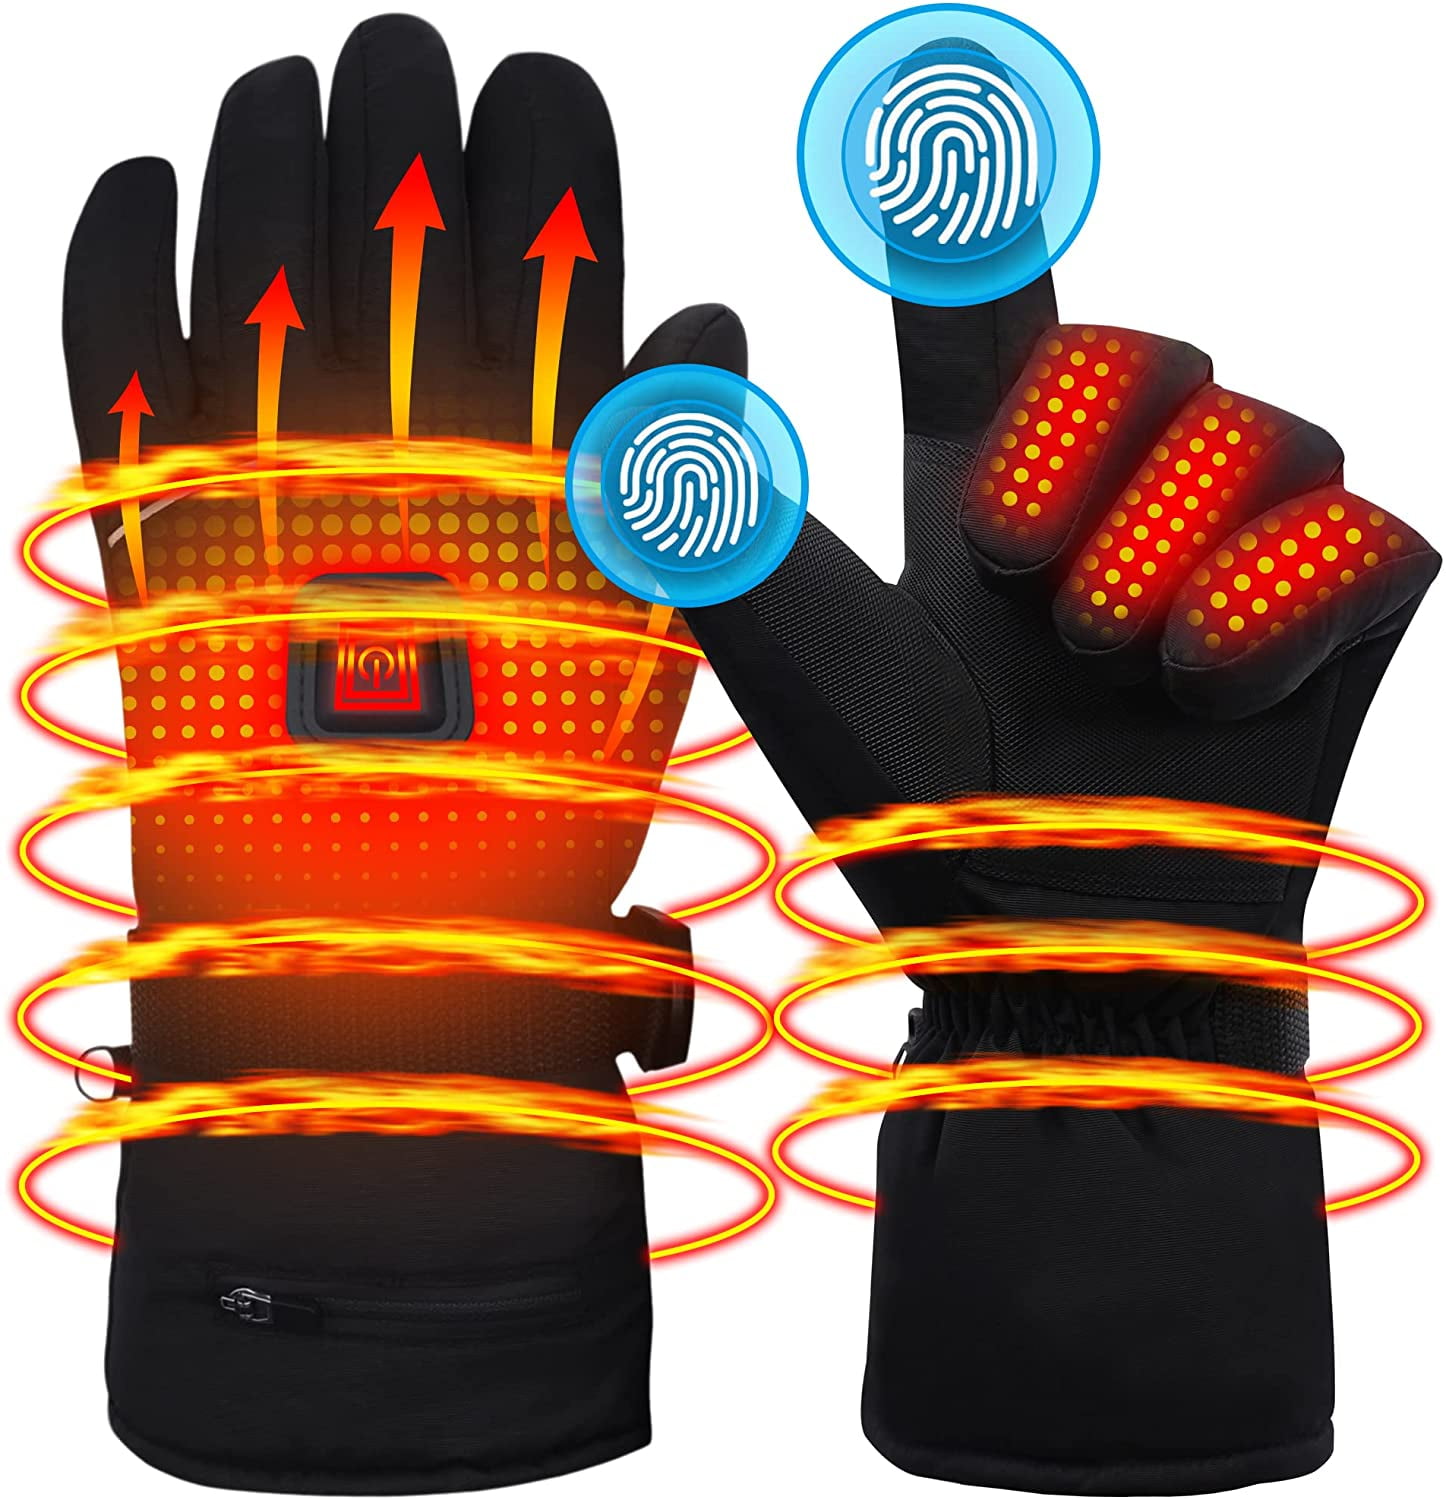 Outdoor Windproof Cycling Heated Hand Warmer Gloves 1Pair 7.4V USB Winter Heating Gloves 